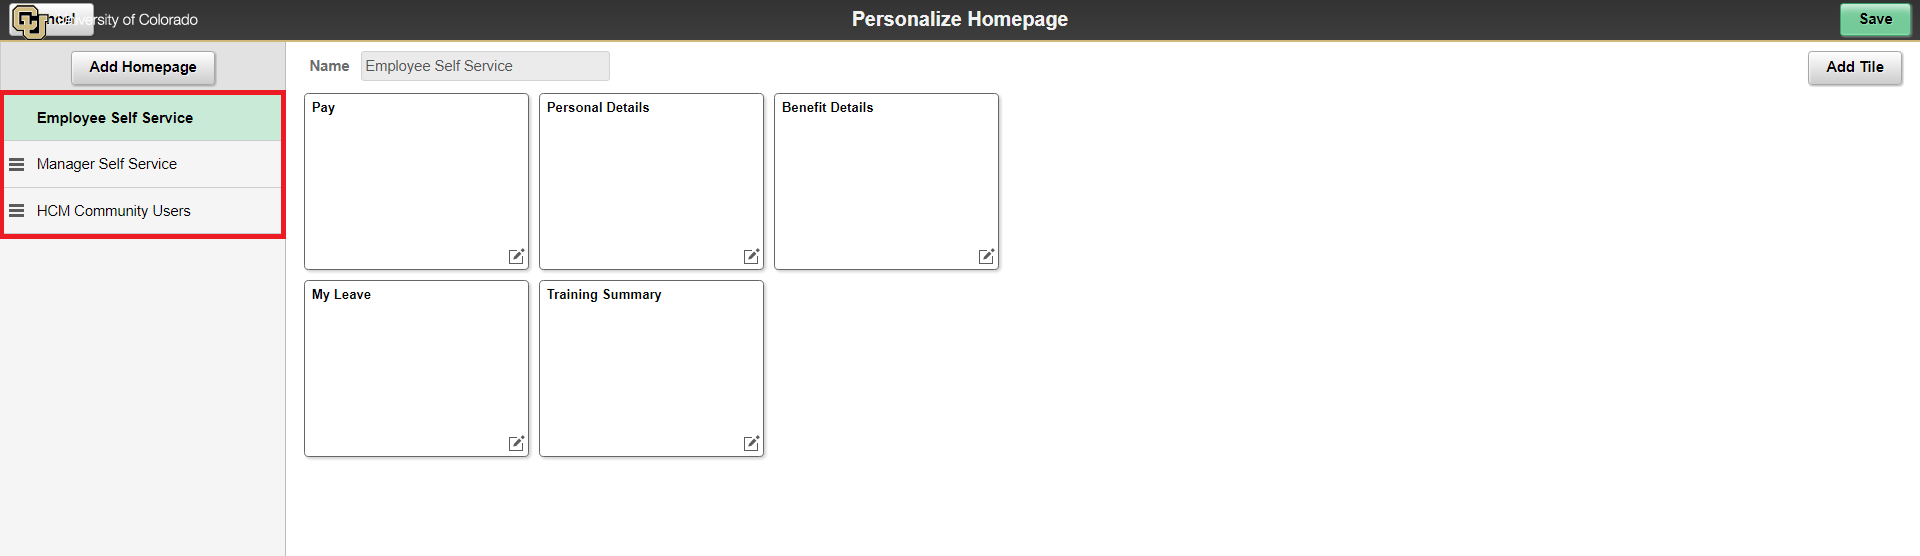 Personalize Homepage Employee Self Service